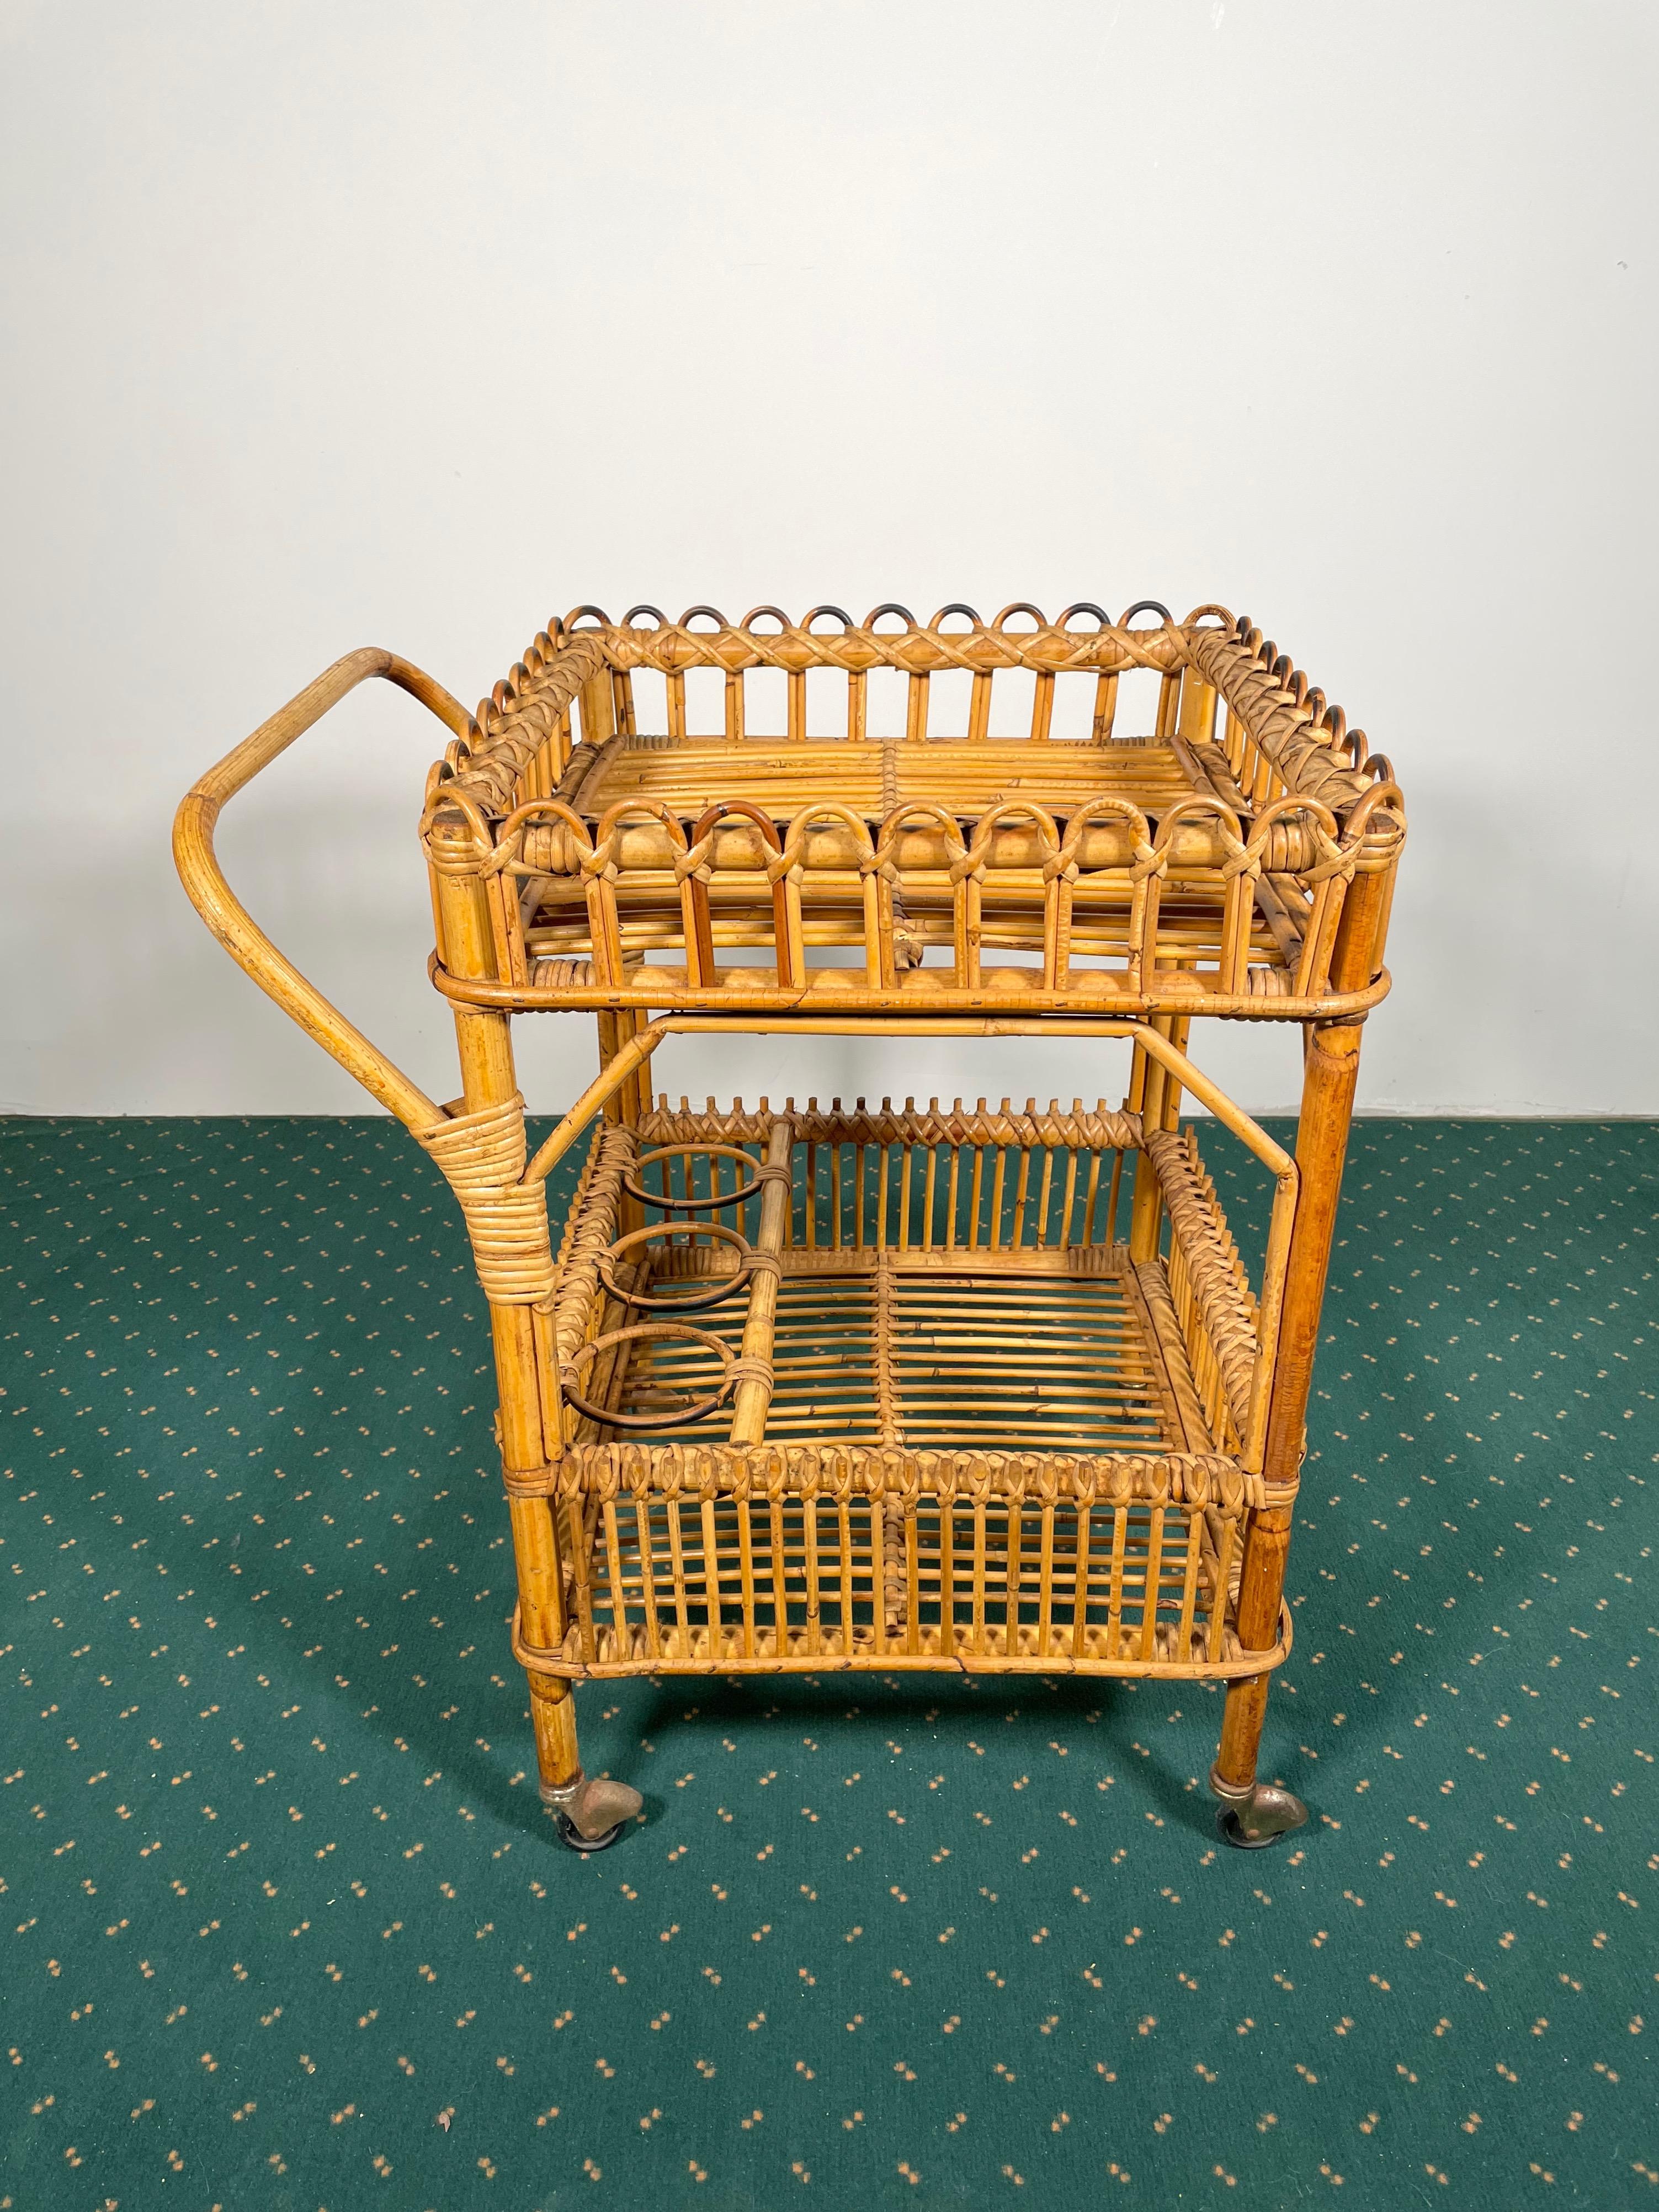 Serving bar cart in bamboo rattan composed of two shelves. The lower one features also three bottle holders. Made in Italy in the 1960s.